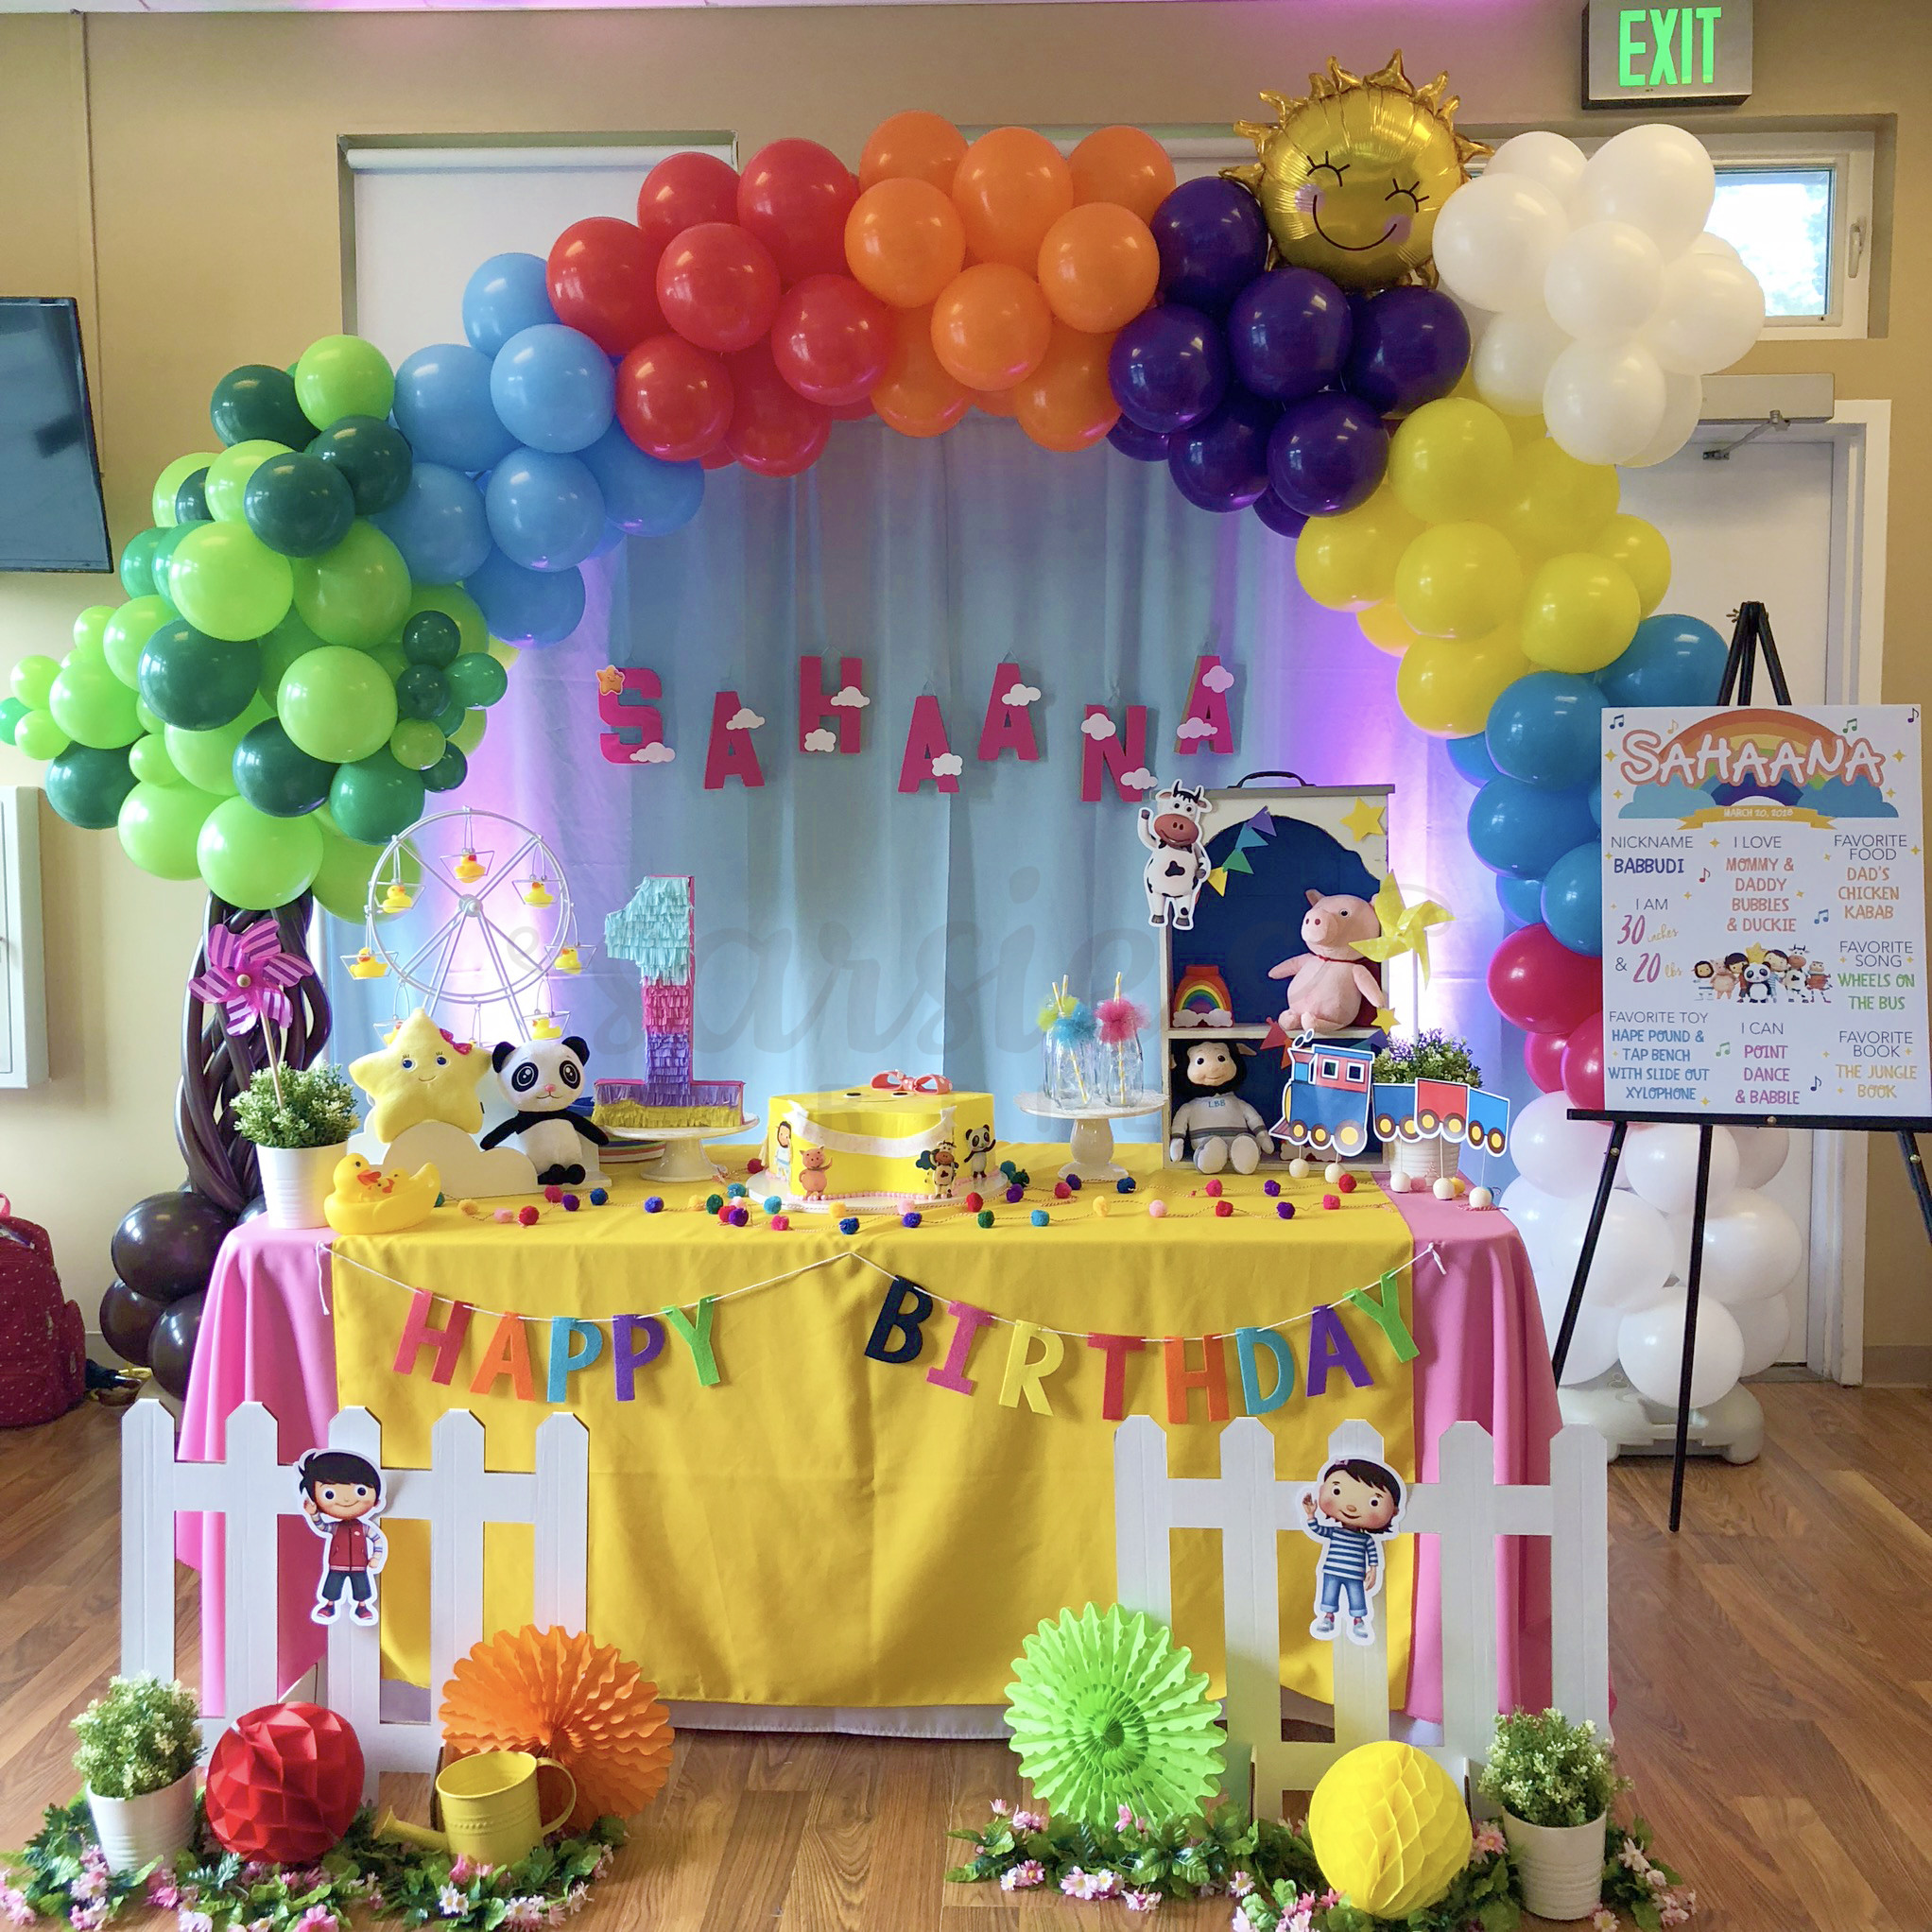 Little Baby Bum Party Theme
 Gallery Party Theme Ideas & Birthday Party Themes